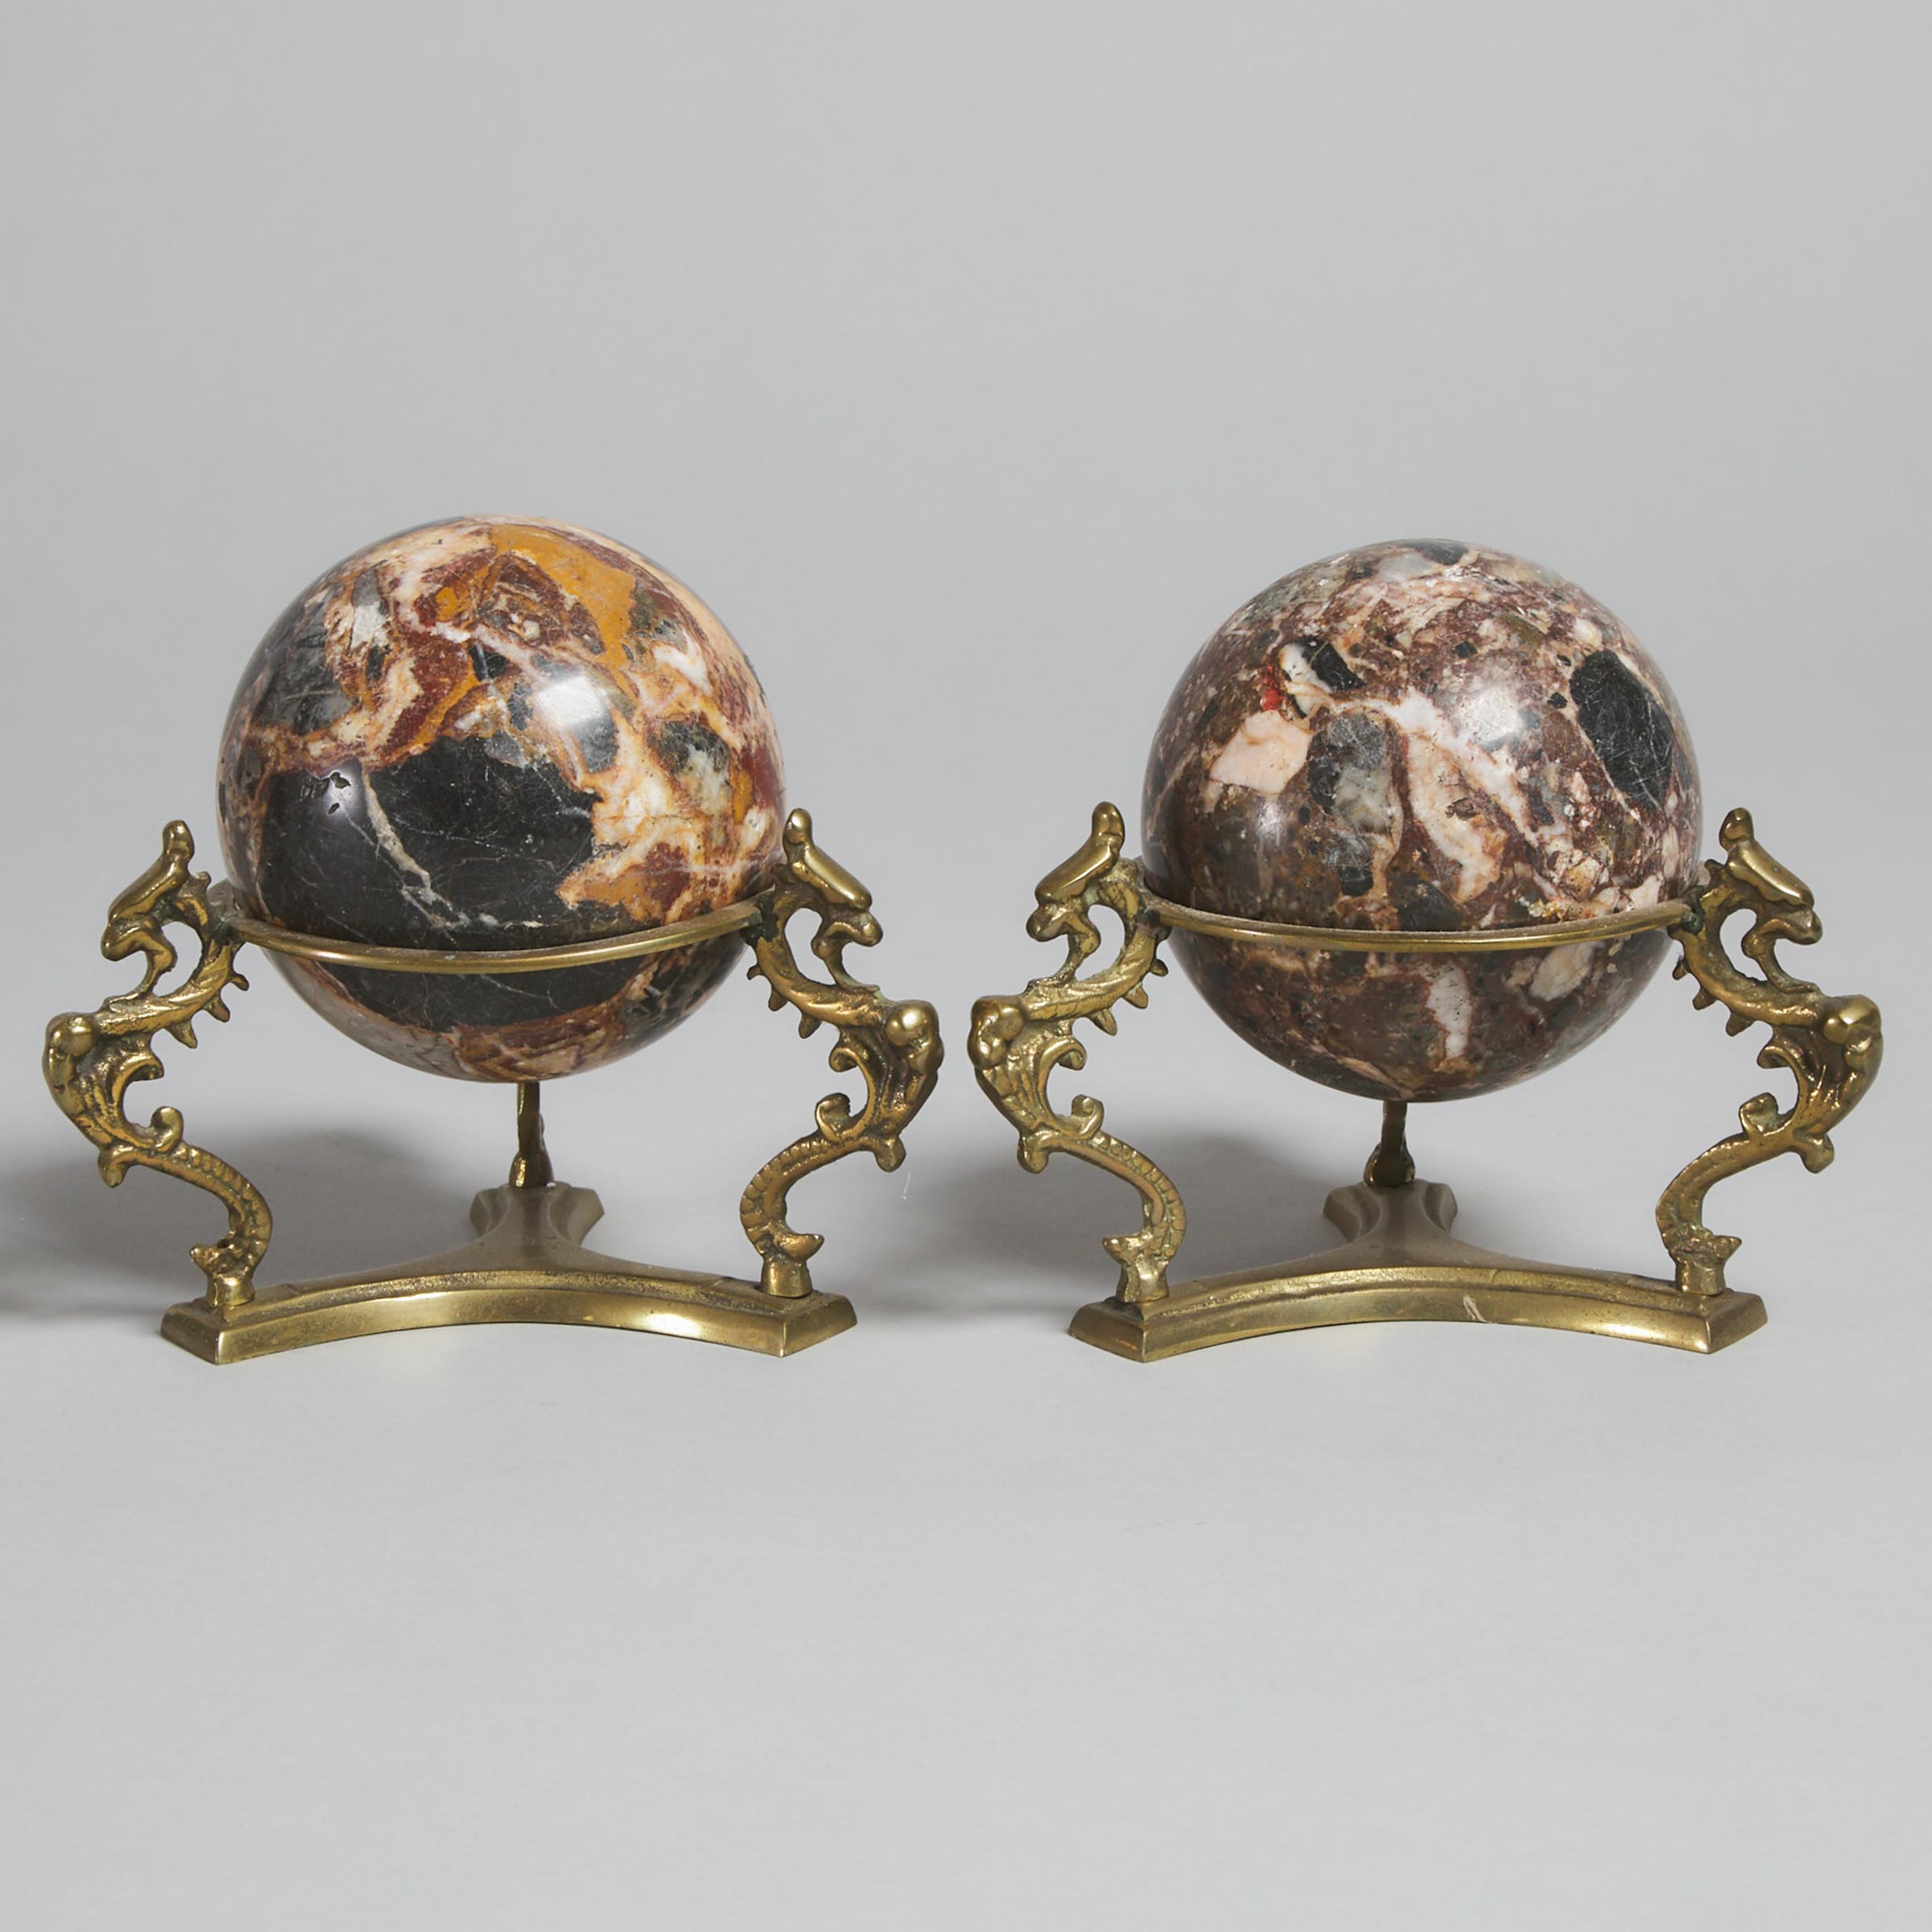 Pair of Specimen Marble Orbs on Bronze Stands, 20th century